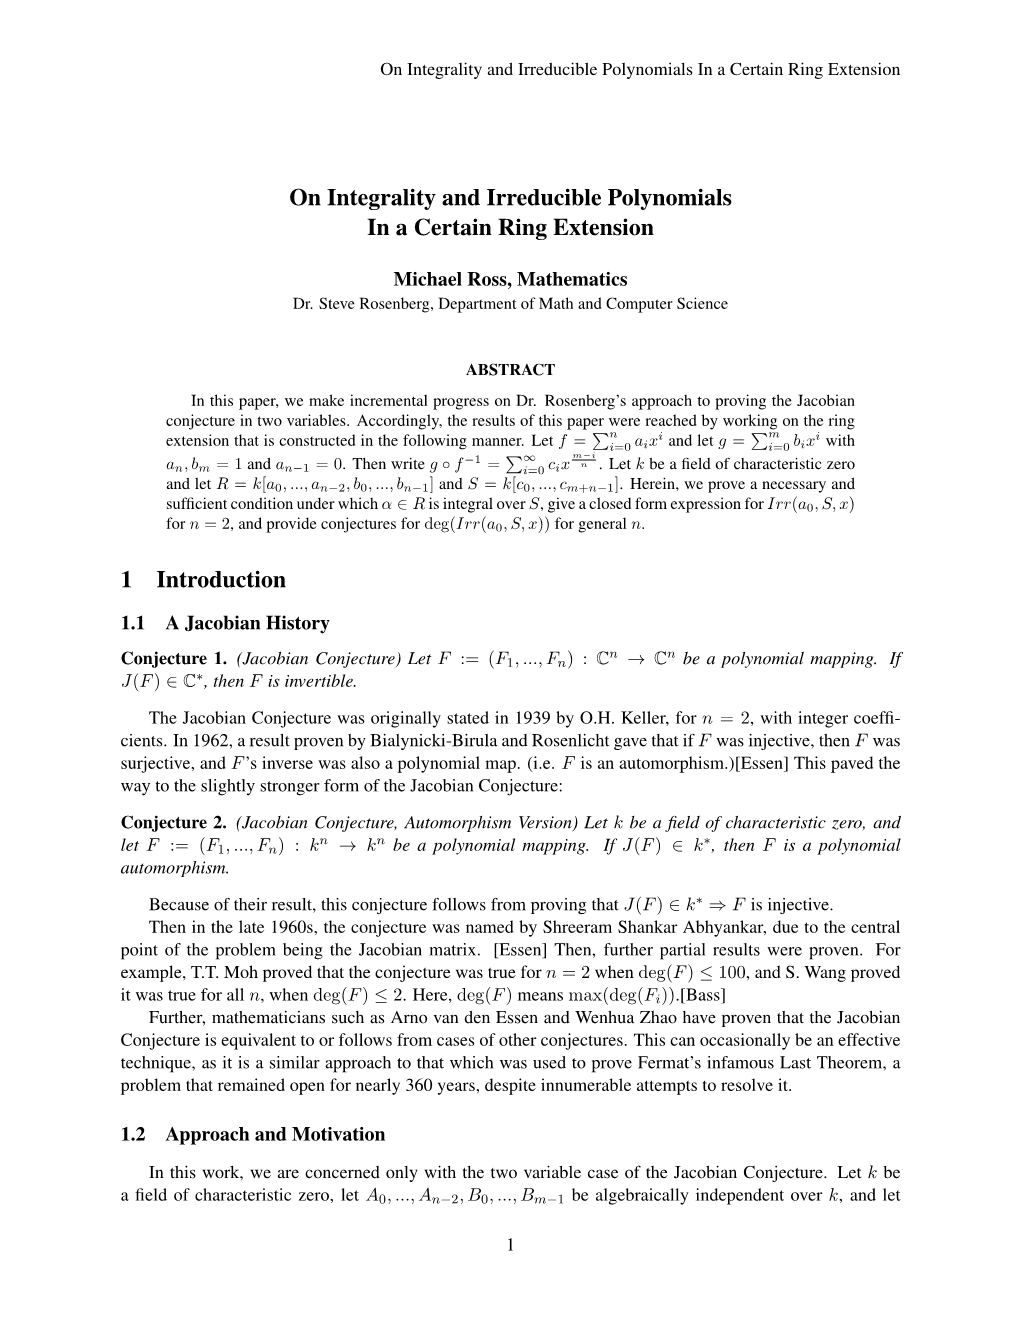 Integrality and Irreducible Polynomials in a Certain Ring Extension, Michael Ross